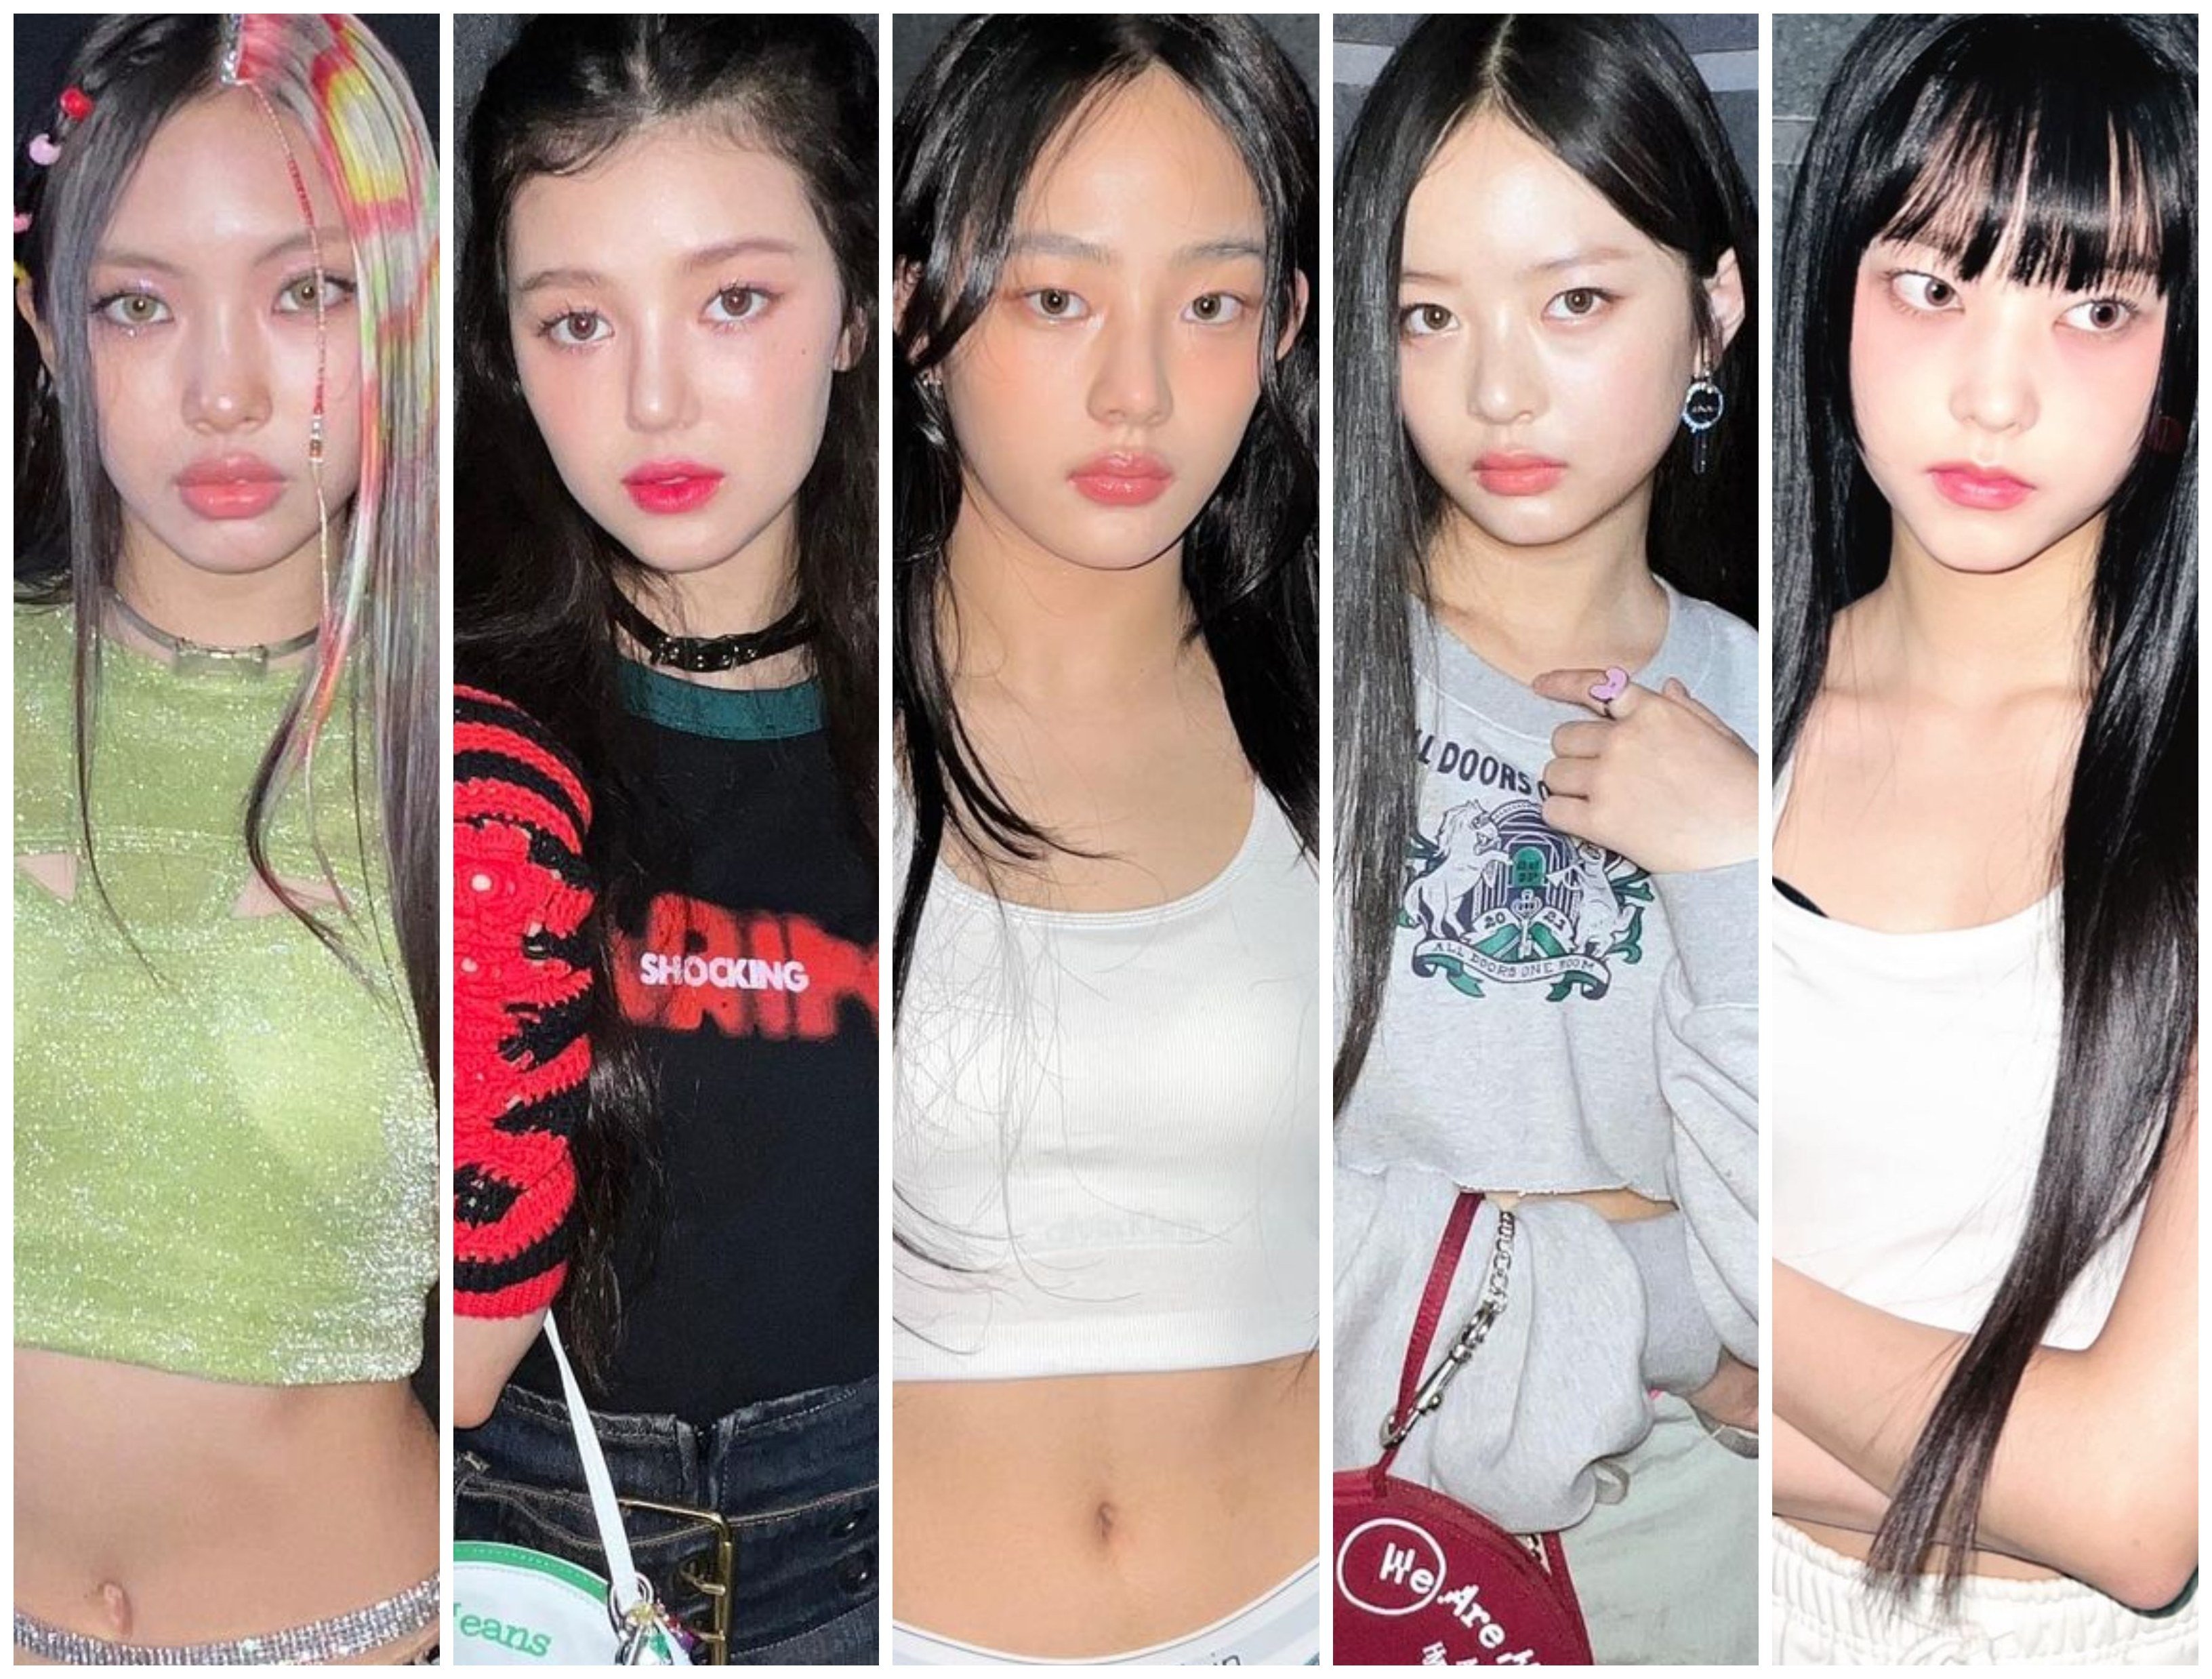 Will NewJeans’ members Hyein, Danielle, Minji, Hanni and Haerin hit the big time like their idols BTS? Photos: @newjeans_official/Instagram